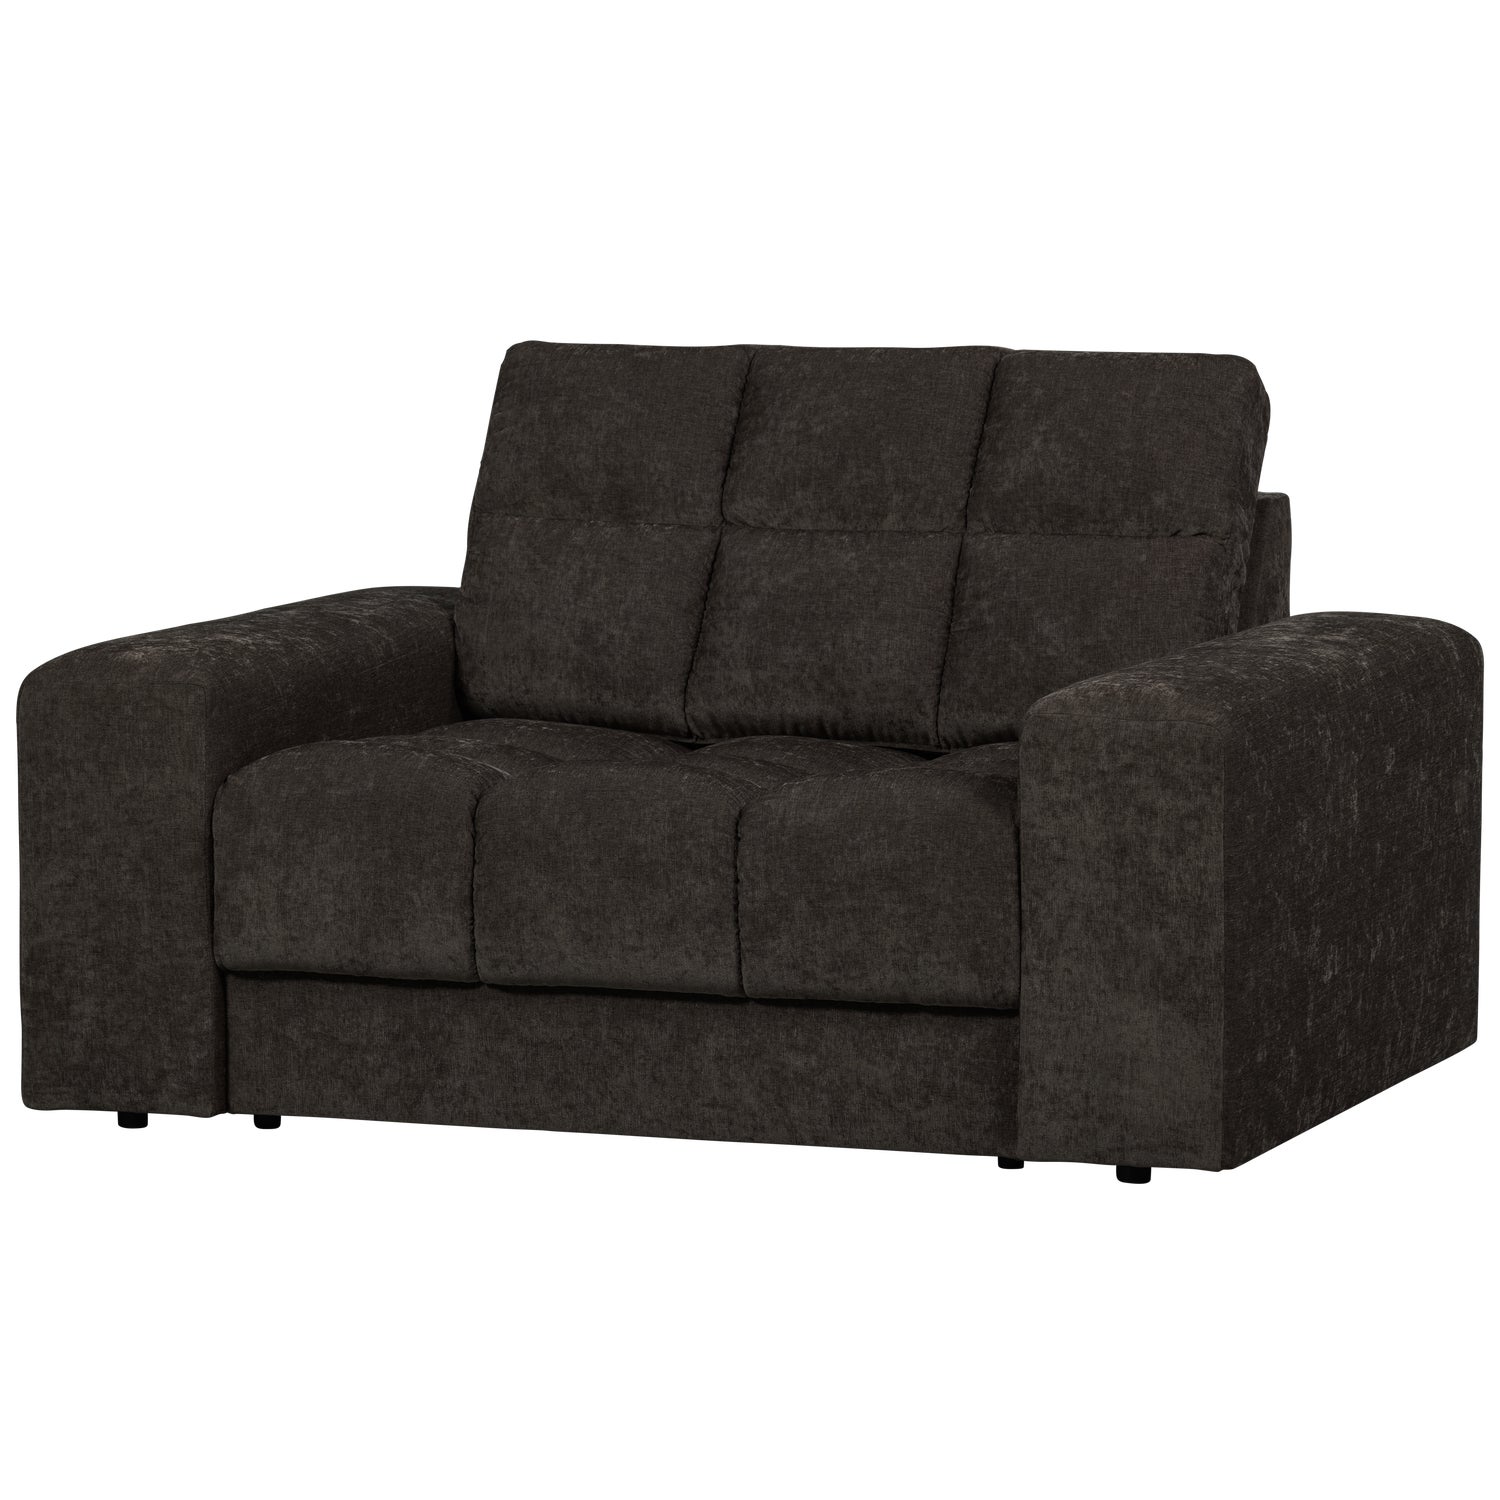 379006-A-02_VS_WE_Second_date_loveseat_vintage_antraciet_SA.png?auto=webp&format=png&width=1500&height=1500